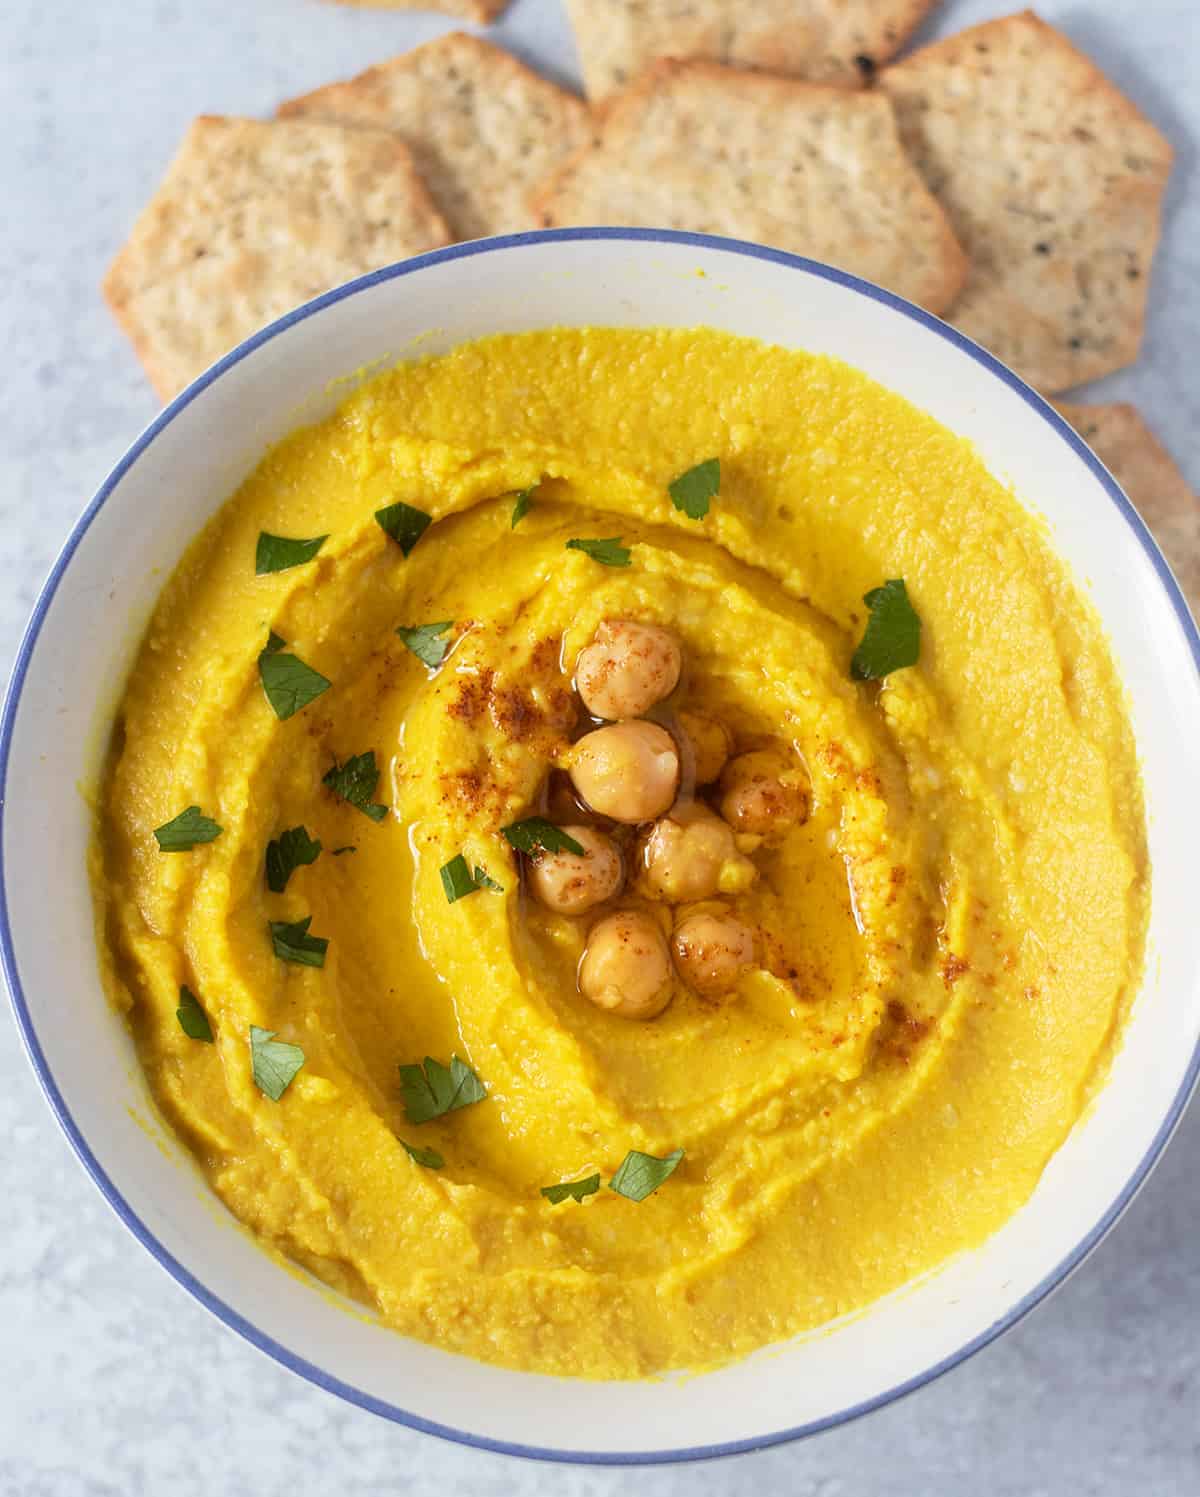 Vegan Turmeric Hummus is a bowl garnished with chickpeas, parsley and olive oil